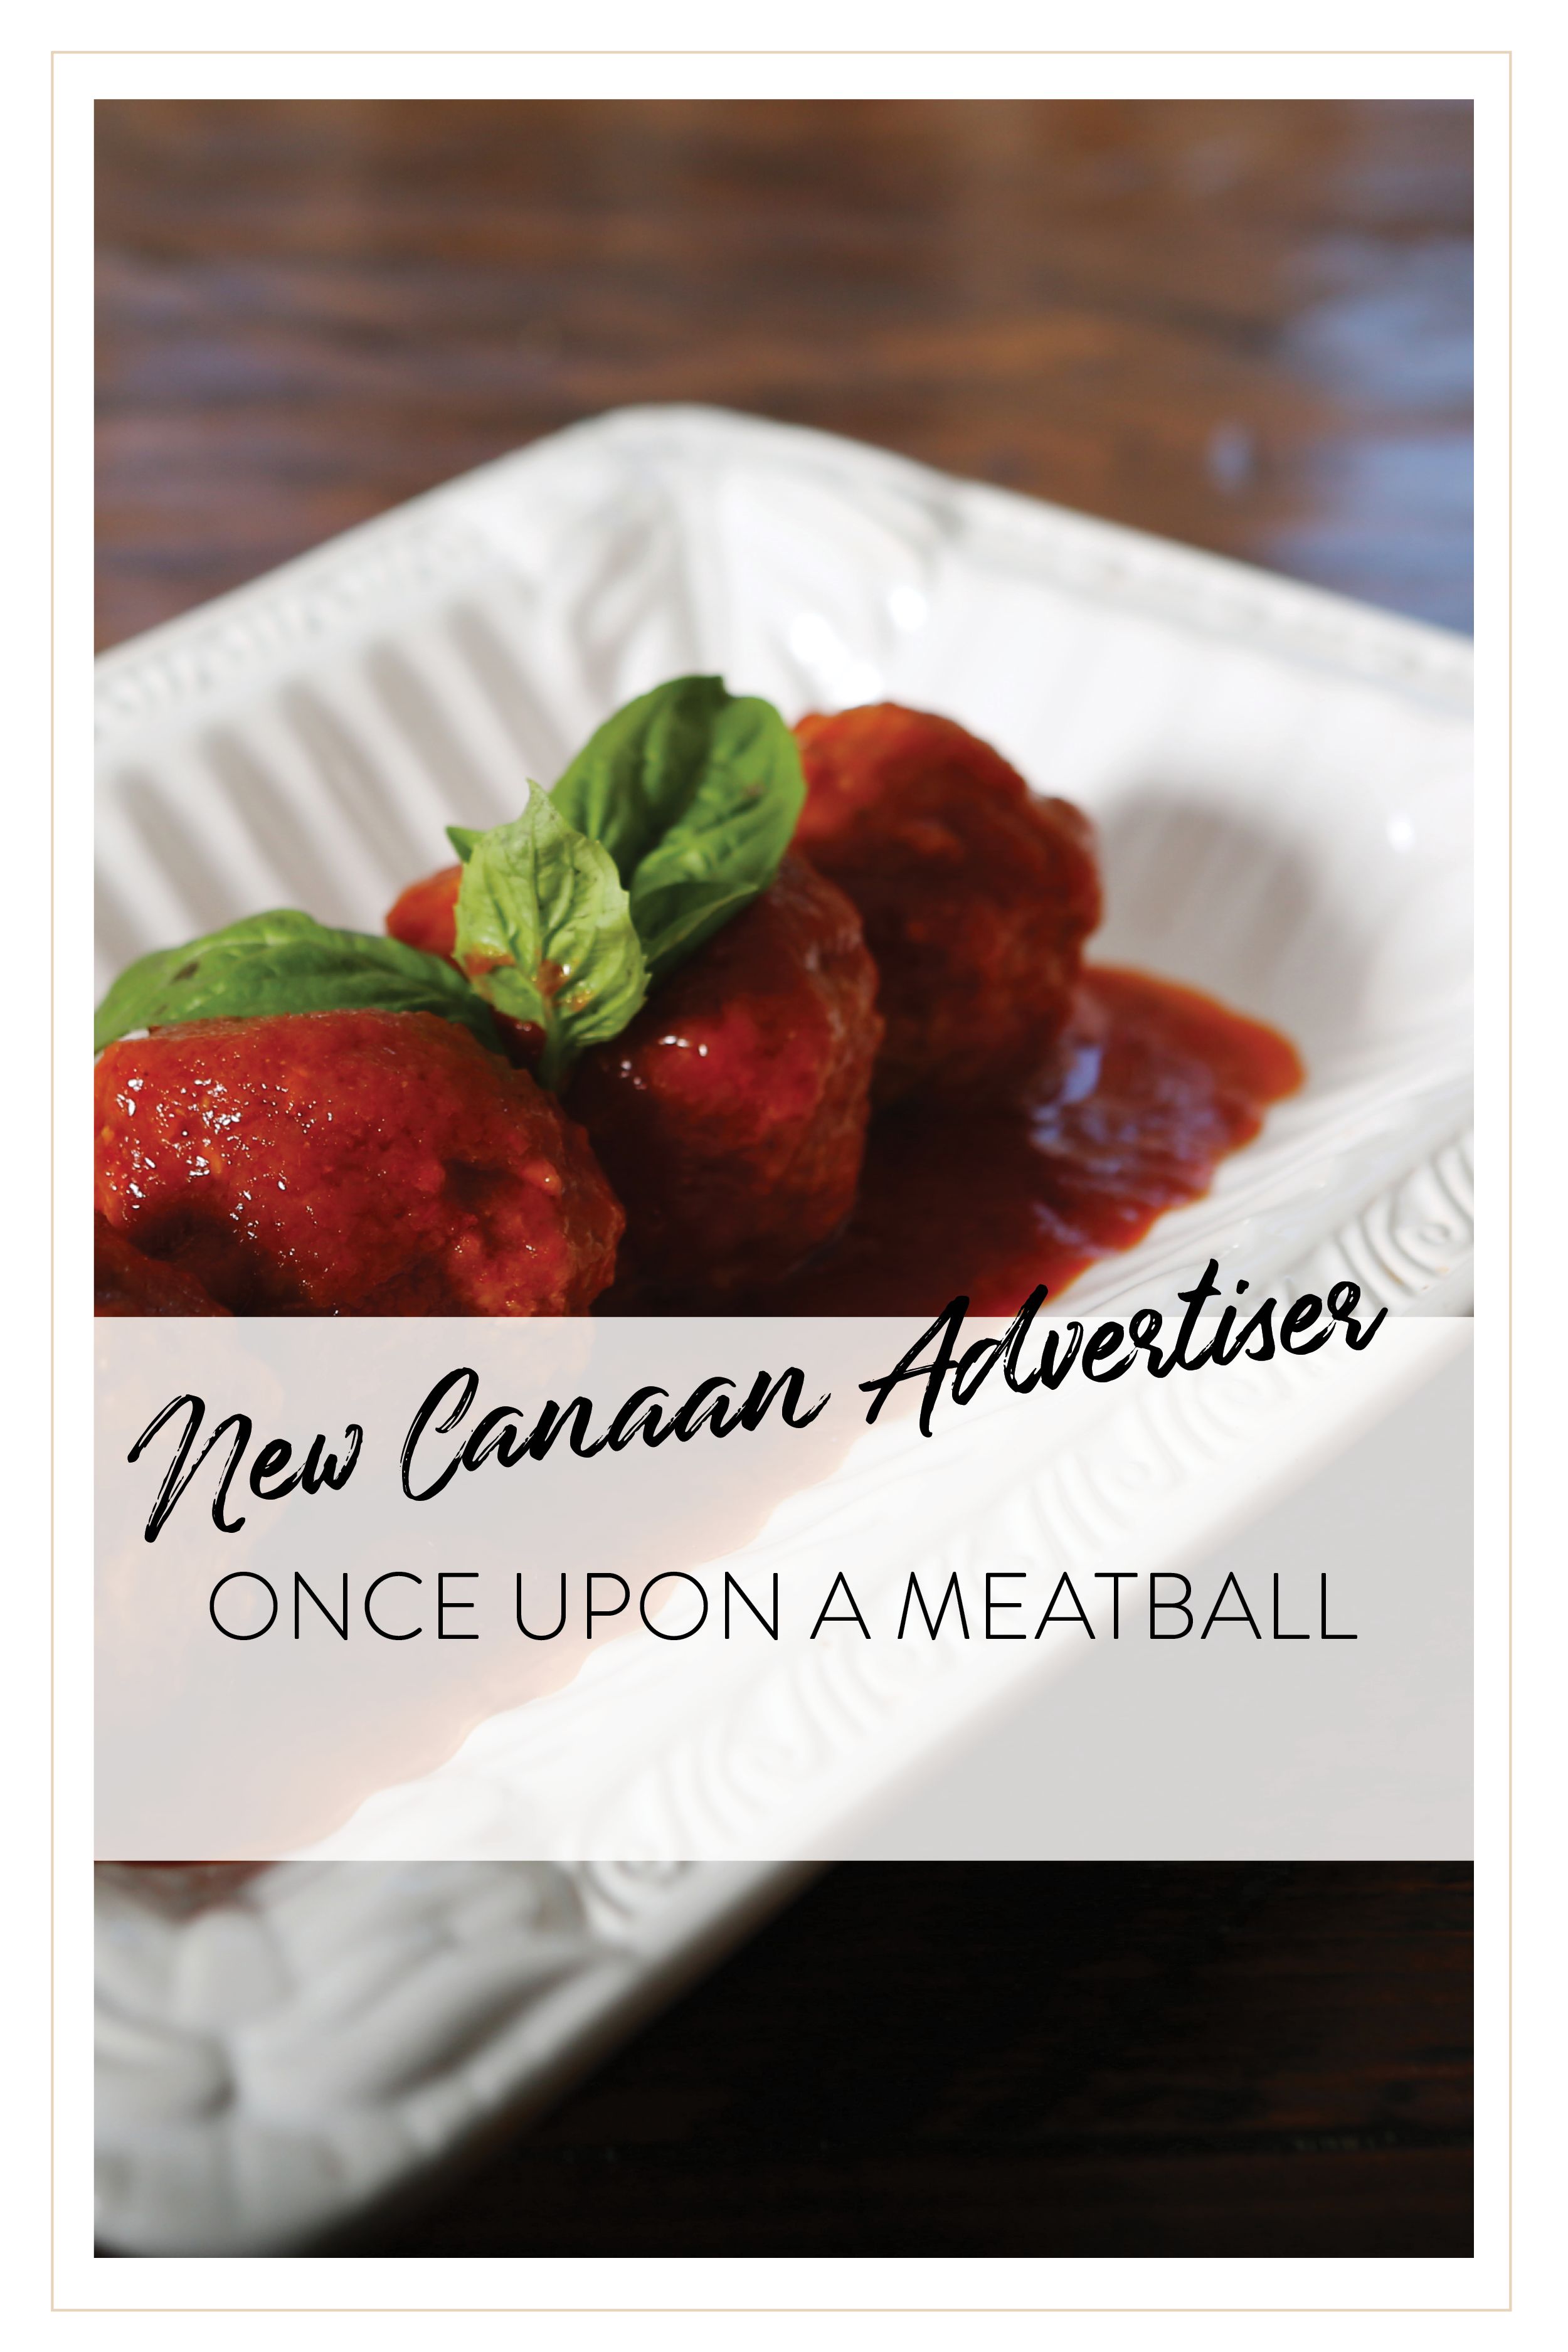 New Canaan Advertiser Once Upon a Meatball